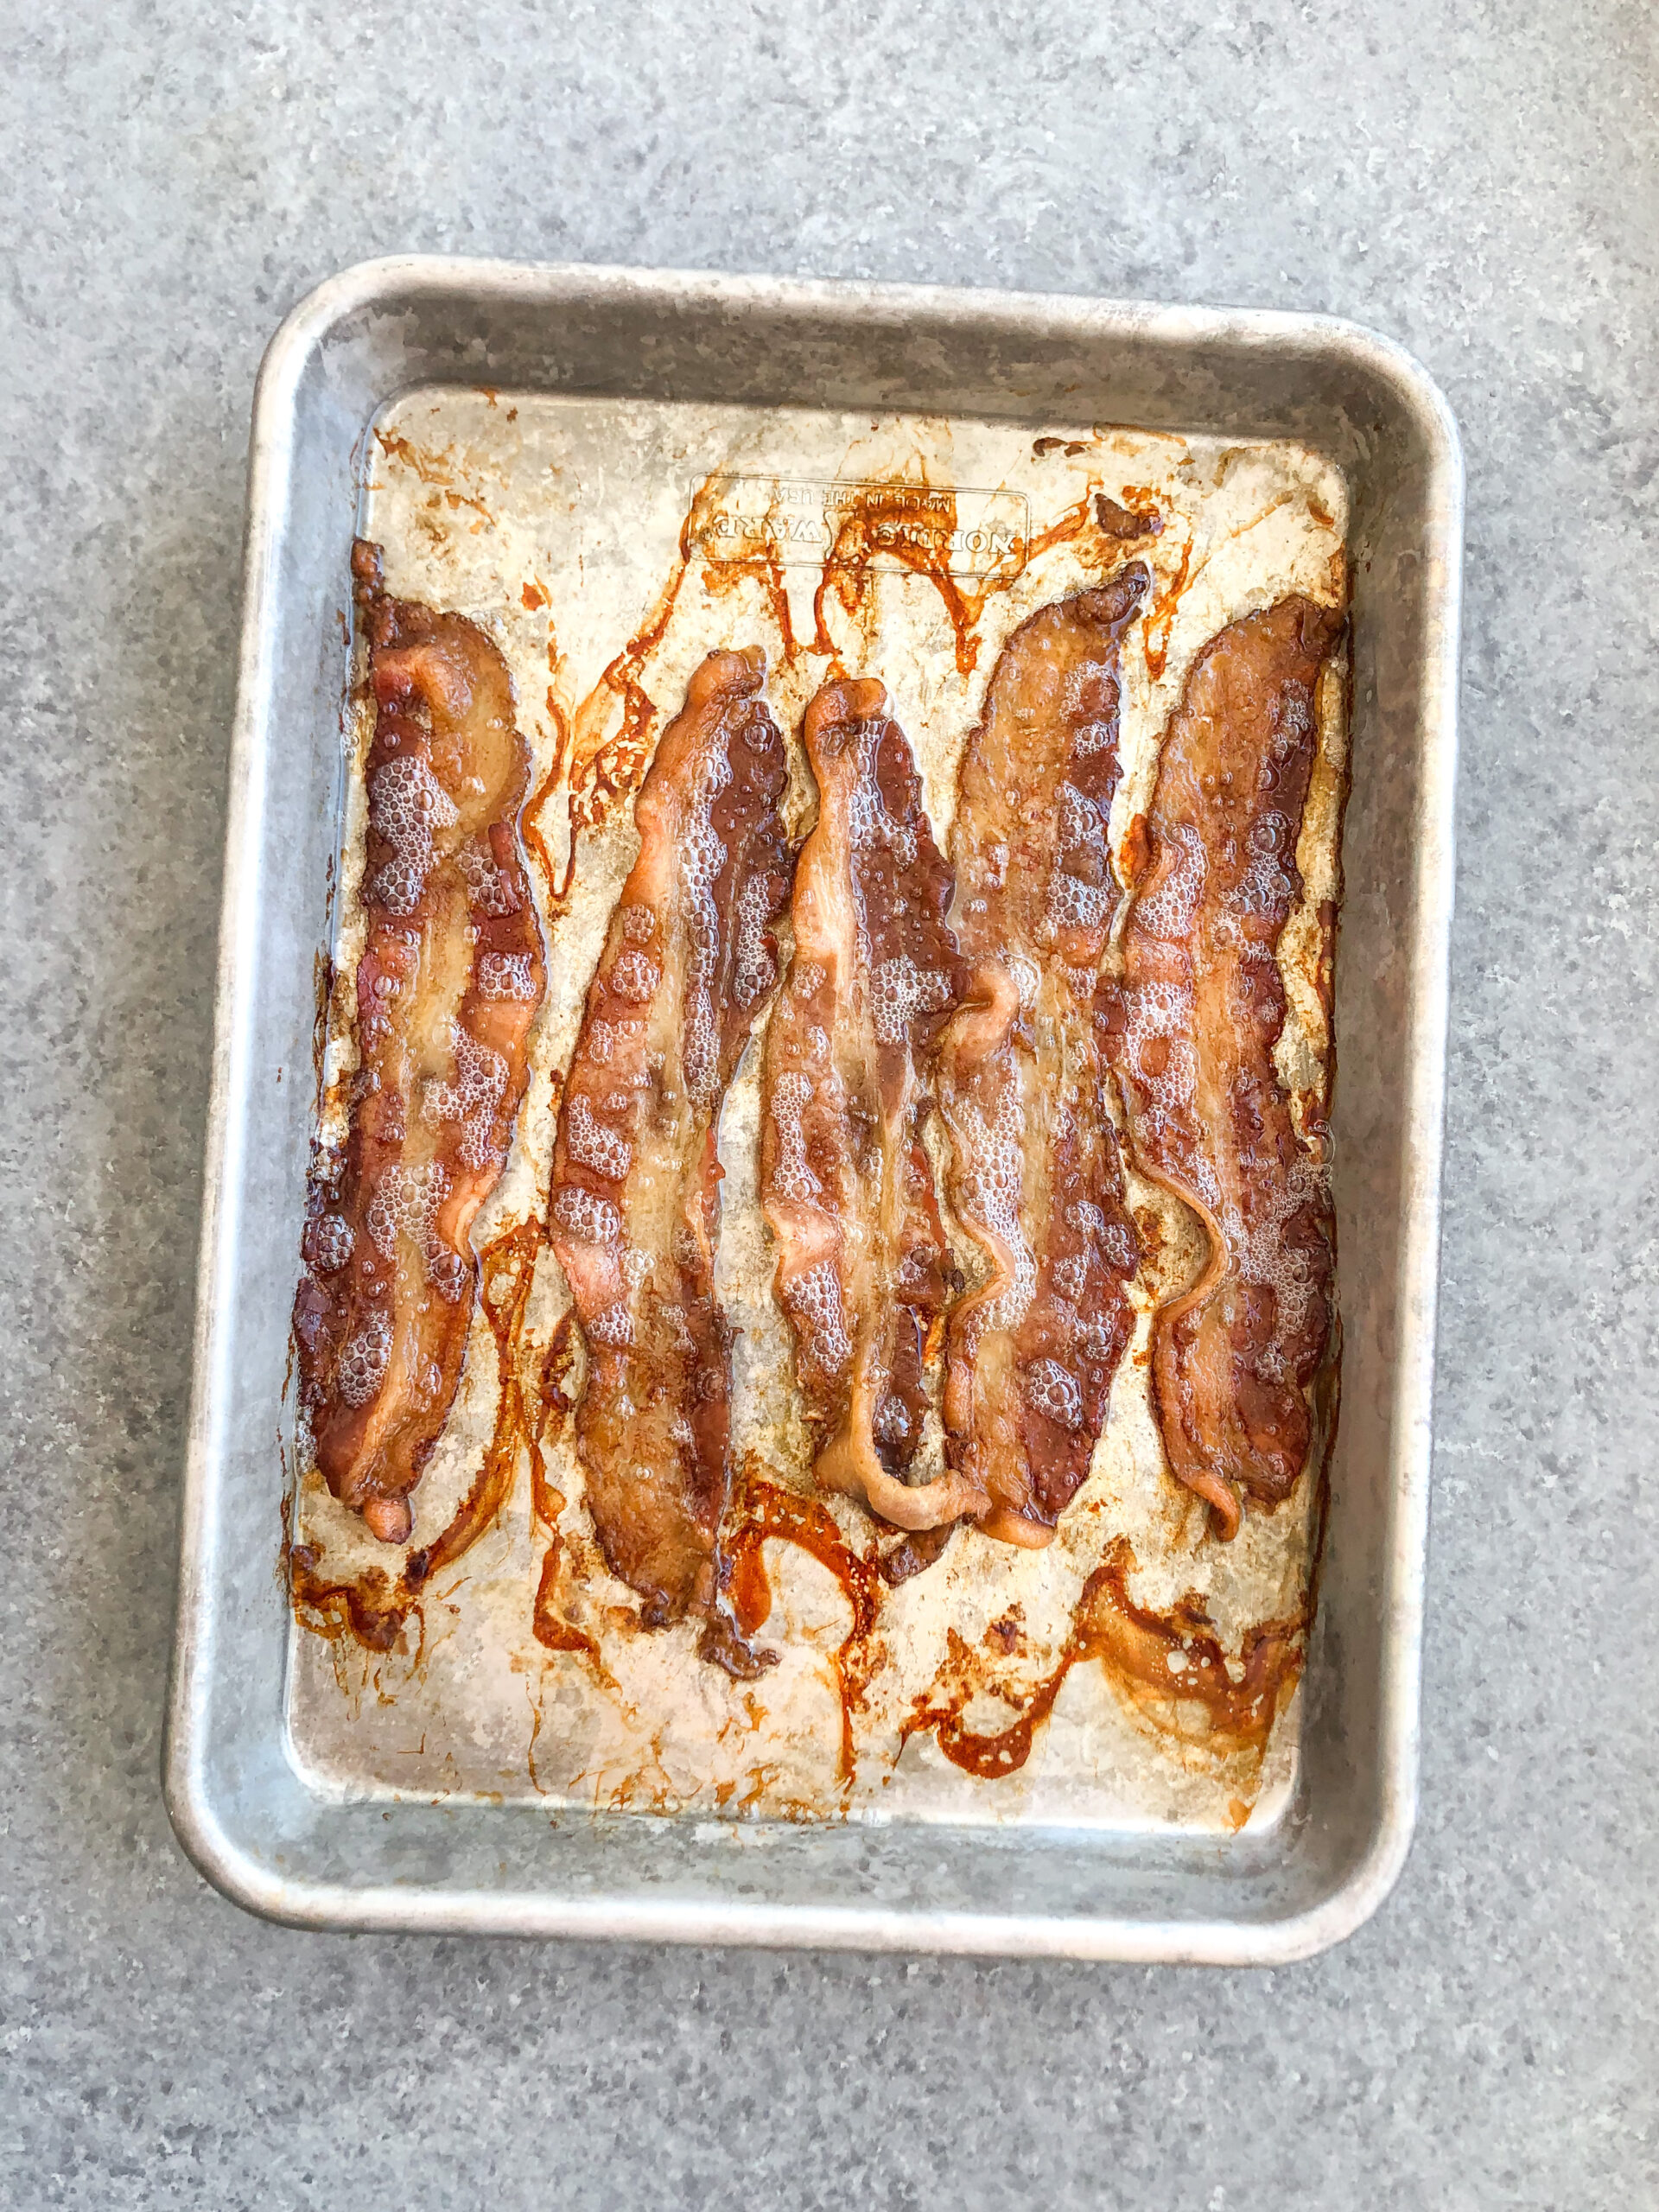 Bacon from the Oven - Nom Nom Paleo®